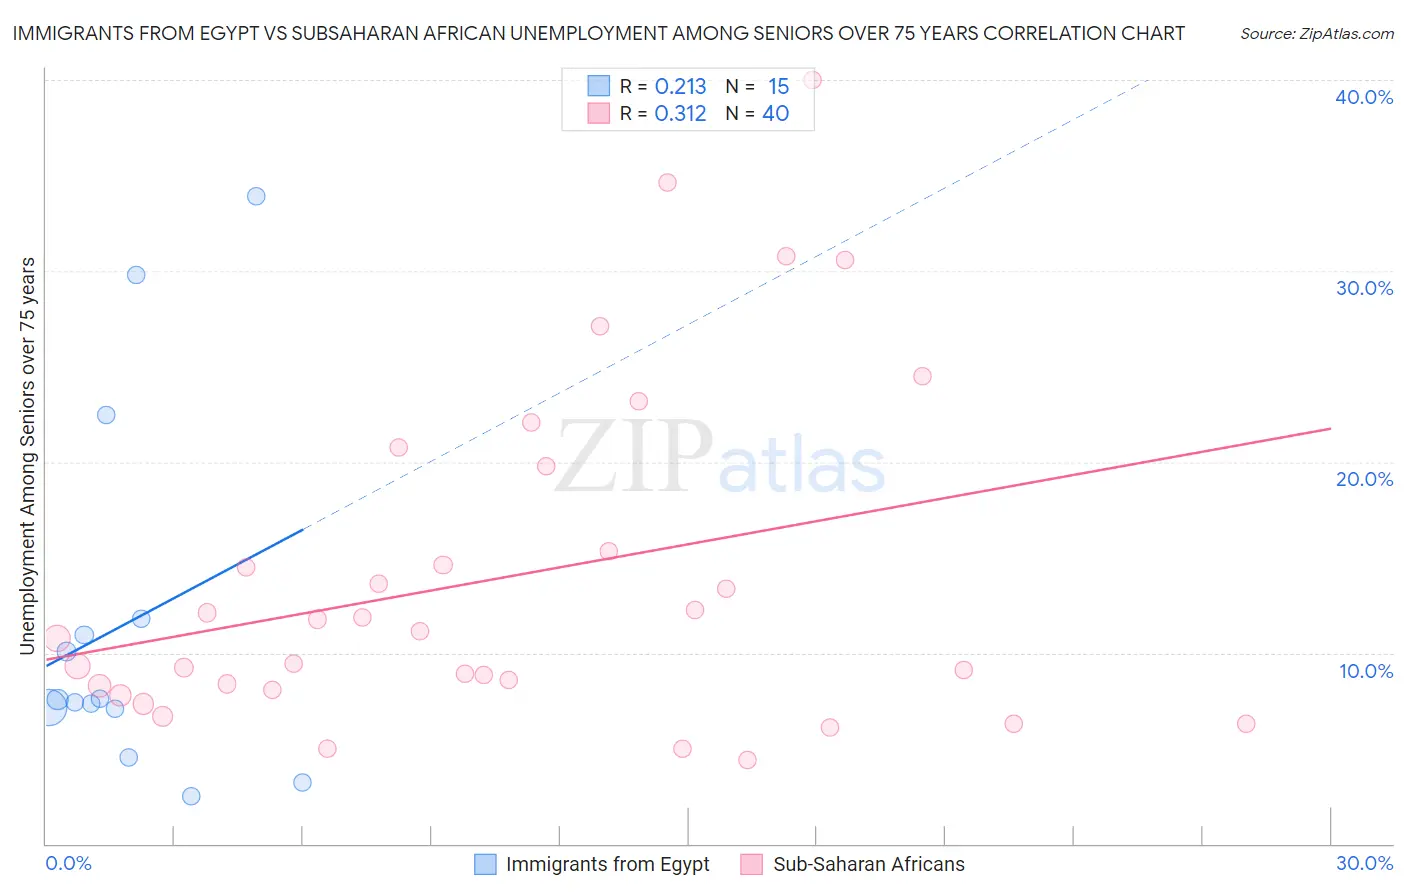 Immigrants from Egypt vs Subsaharan African Unemployment Among Seniors over 75 years